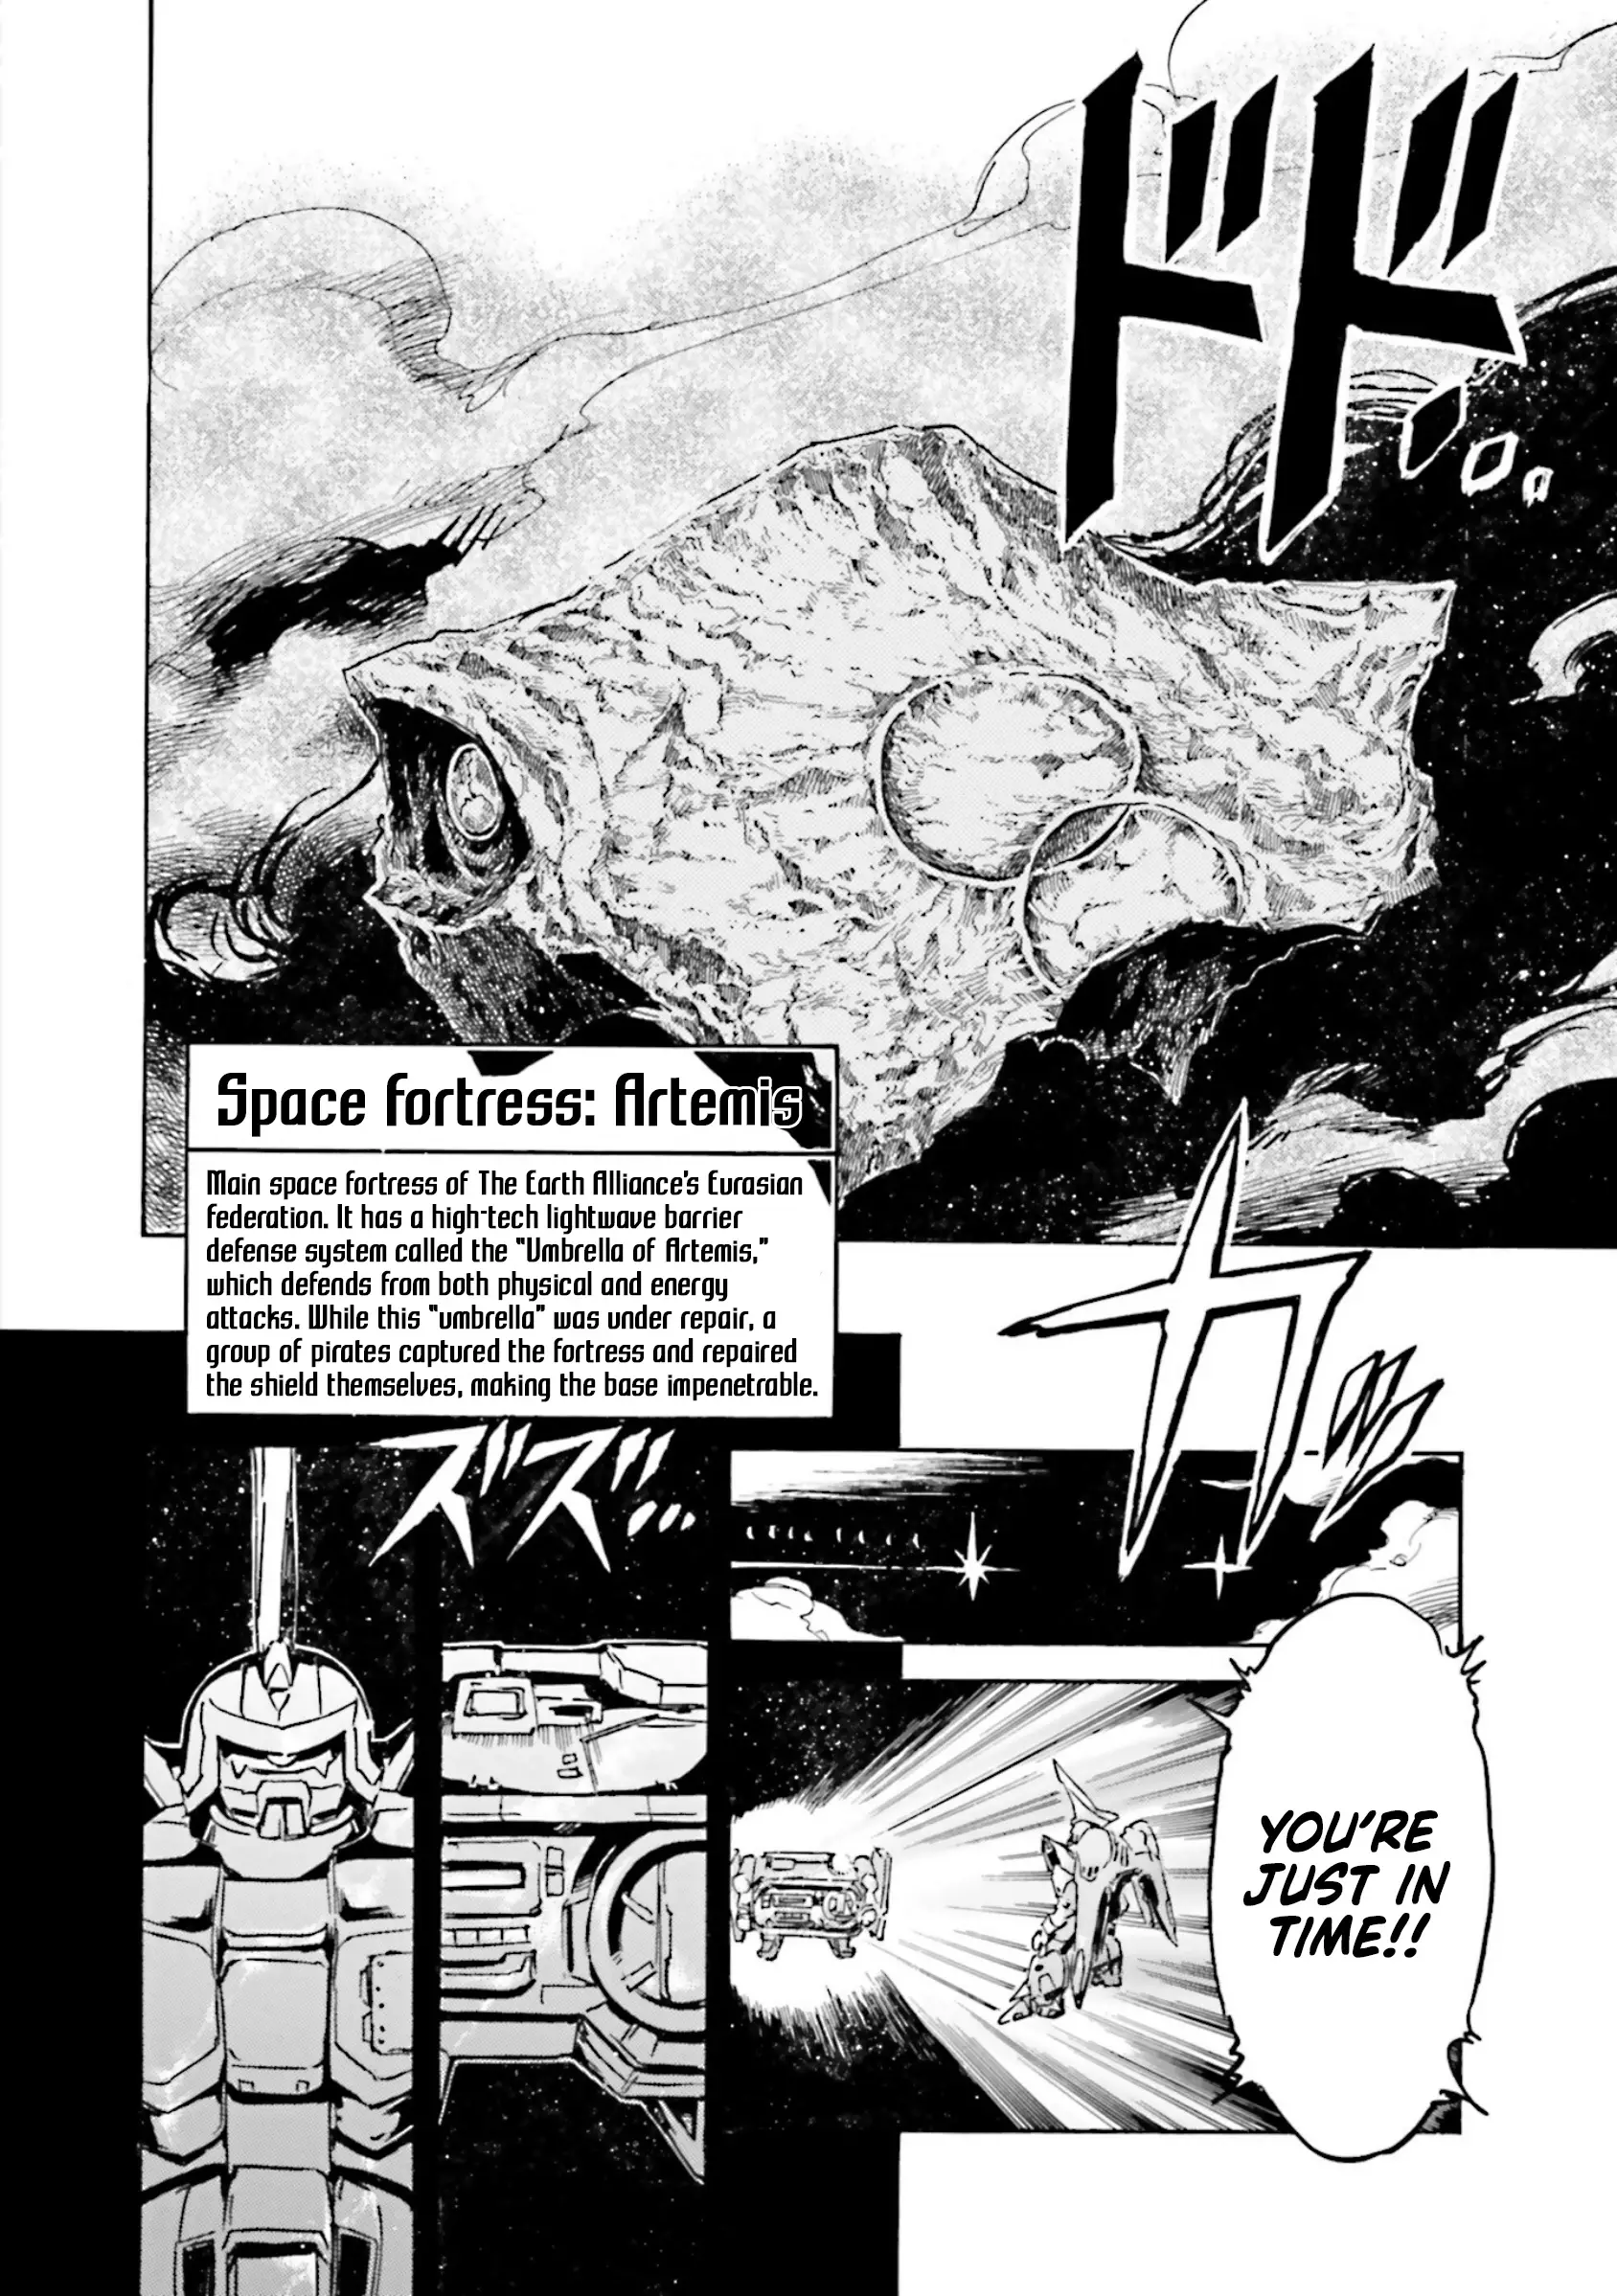 Mobile Suit Gundam Seed Astray R - 4.5 page 2-53943656